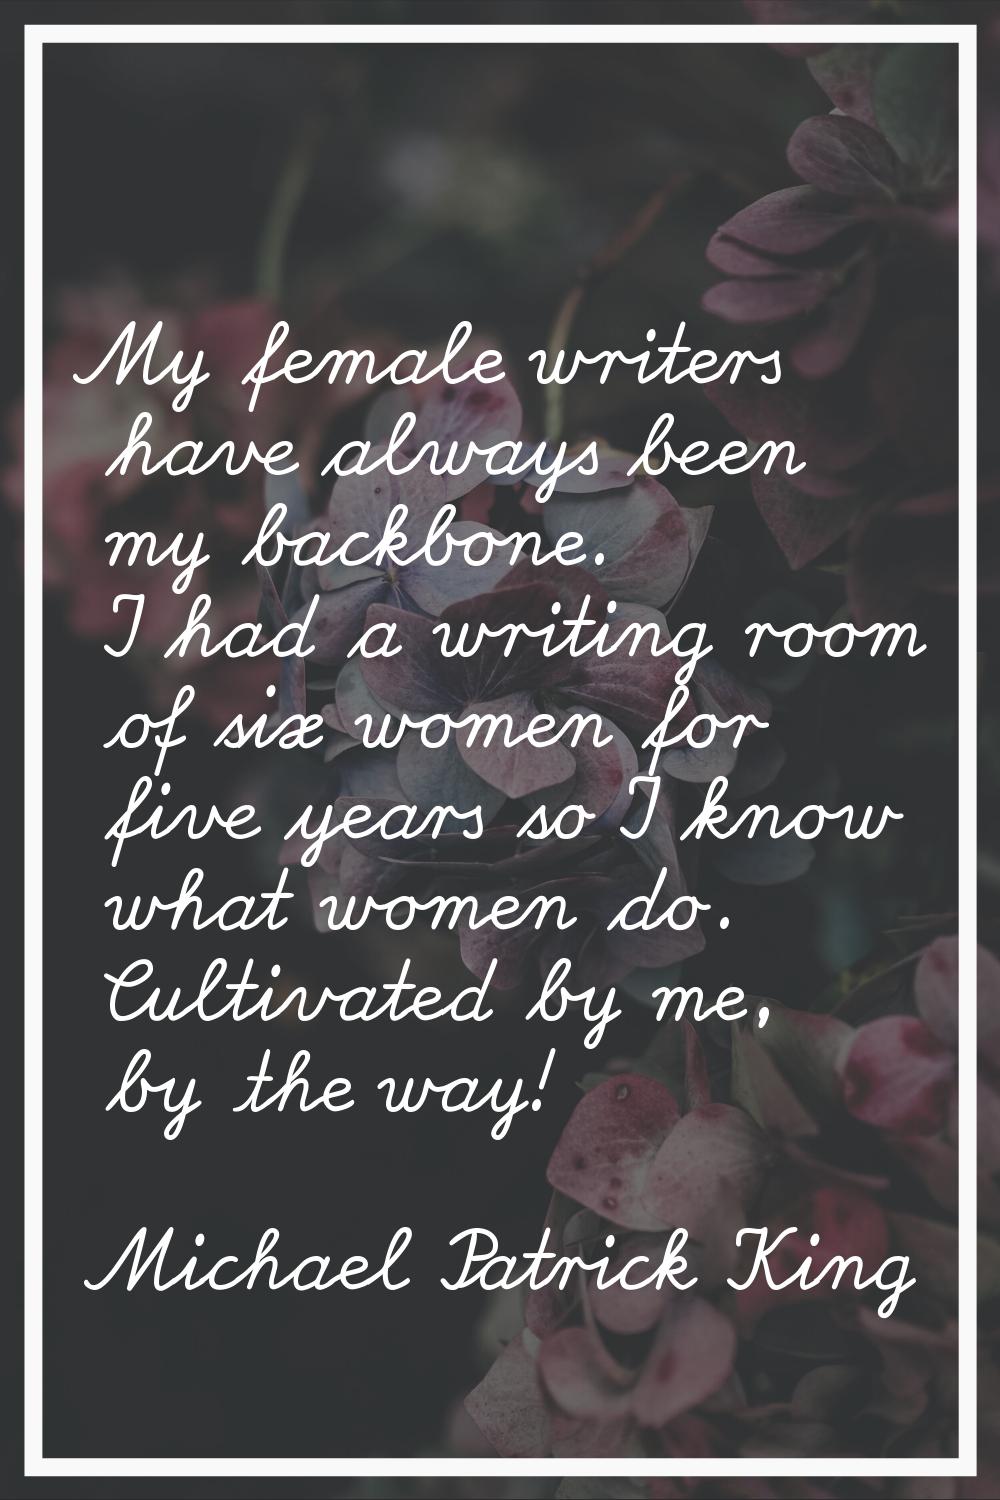 My female writers have always been my backbone. I had a writing room of six women for five years so